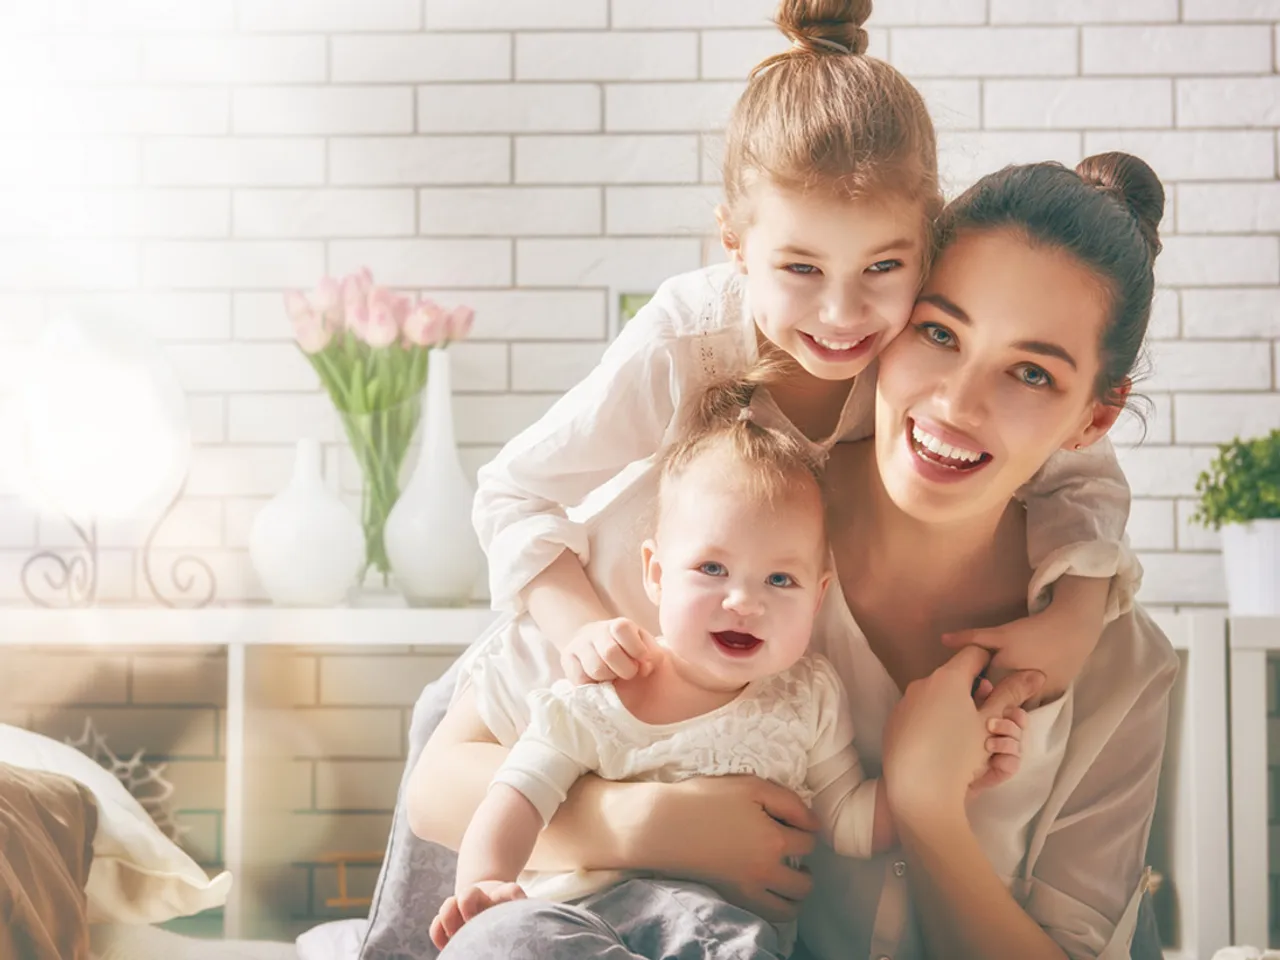 A look at Mother's Day campaigns that dominate social media